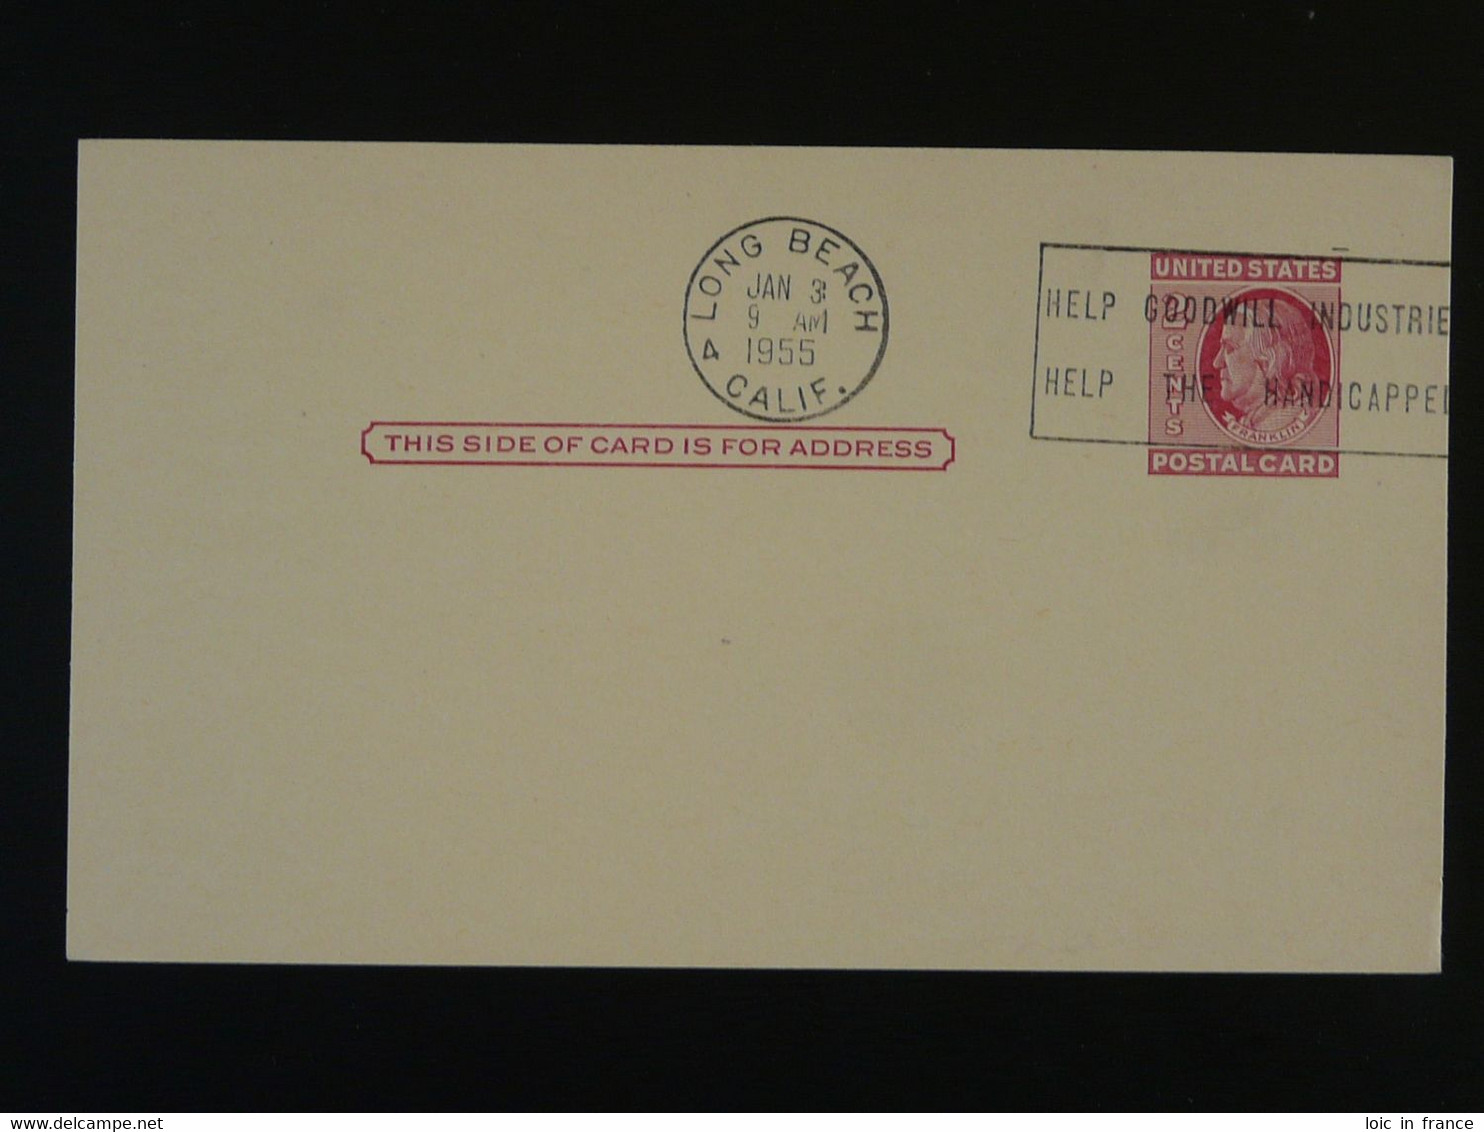 Hire The Handicapped 1955 Flamme Sur Entier Postal Postmark On Stationery Card Long Beach USA Ref 773 - 1941-60